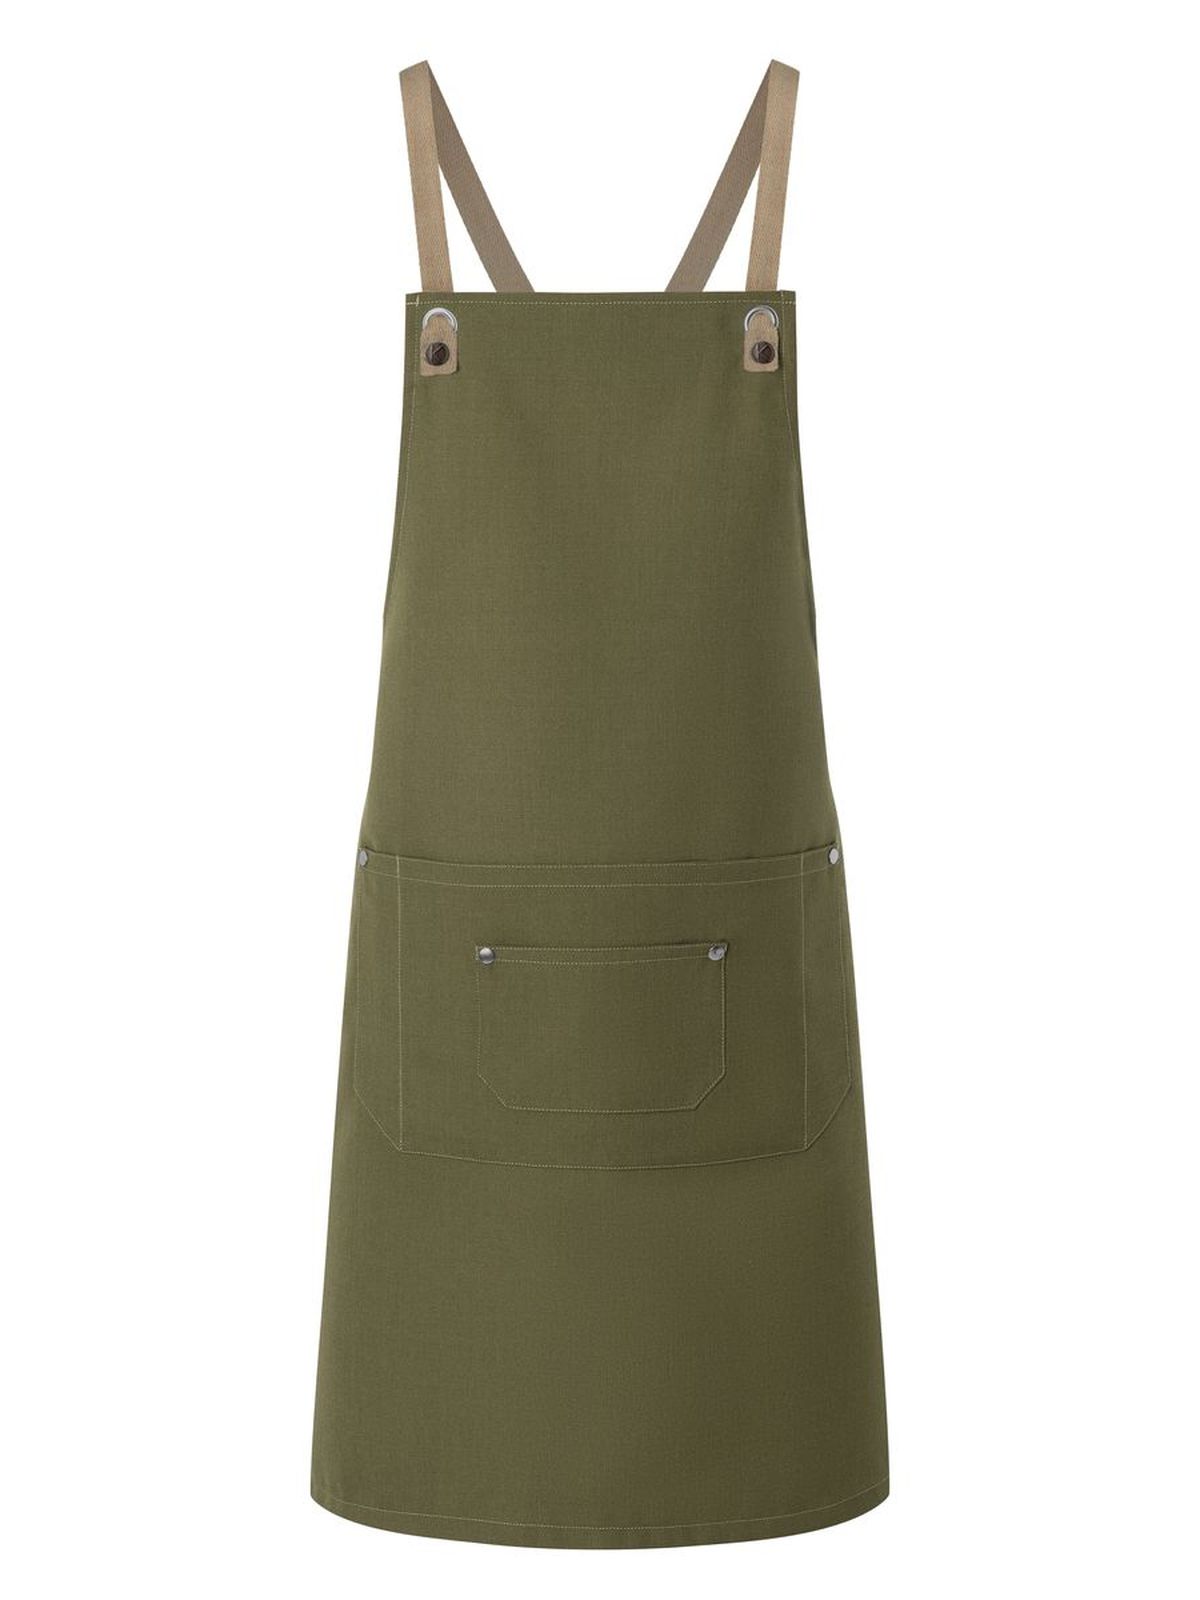 bib-apron-with-crossed-ribbons-and-big-pocket-moss-green.webp